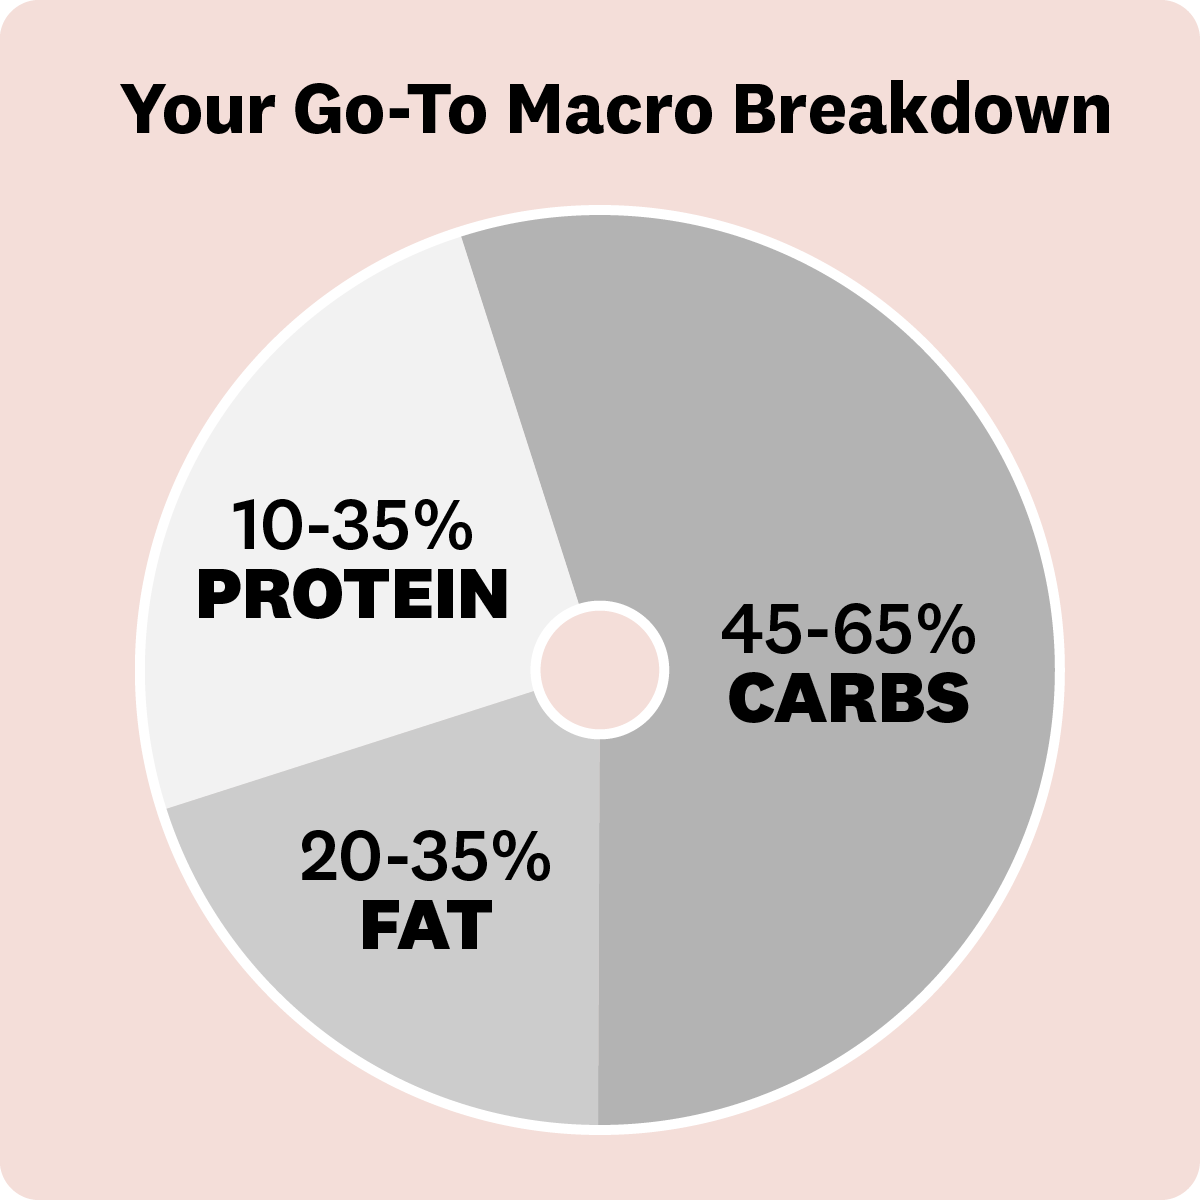 What Is the Macro Diet - How to Count Macros for Weight Loss